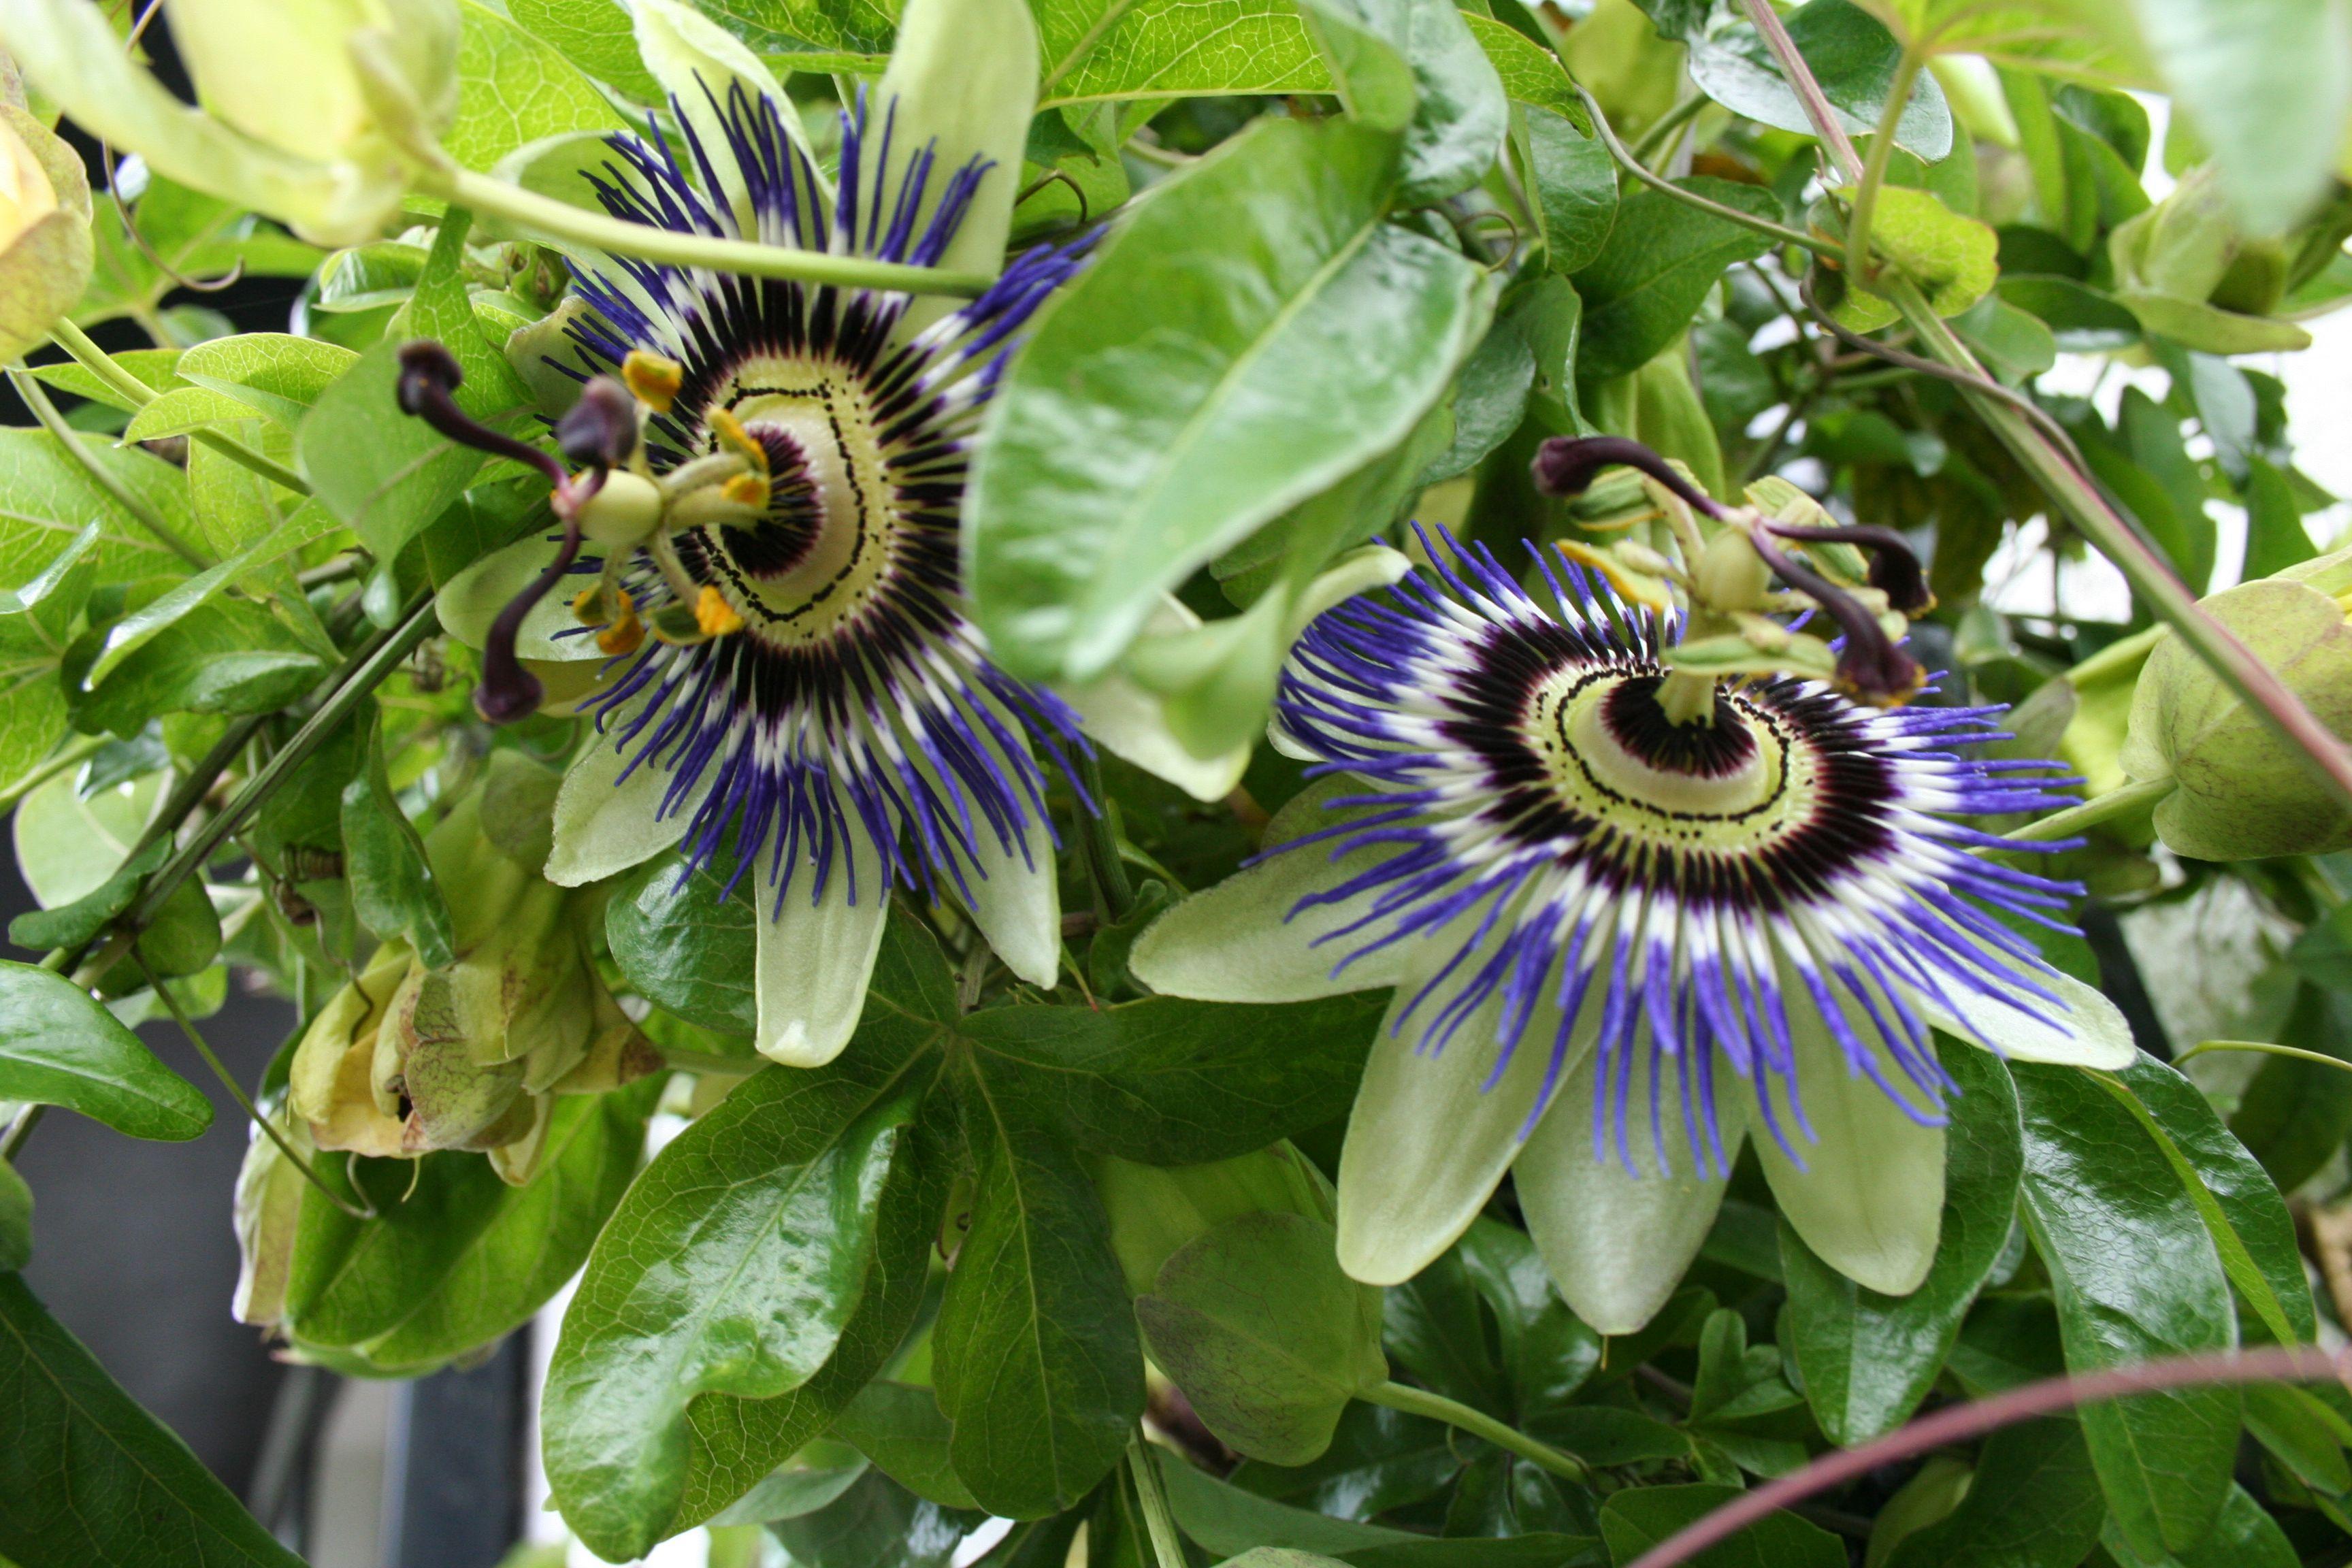 Passion Flower Wallpaper. Passion Flower Background and Image